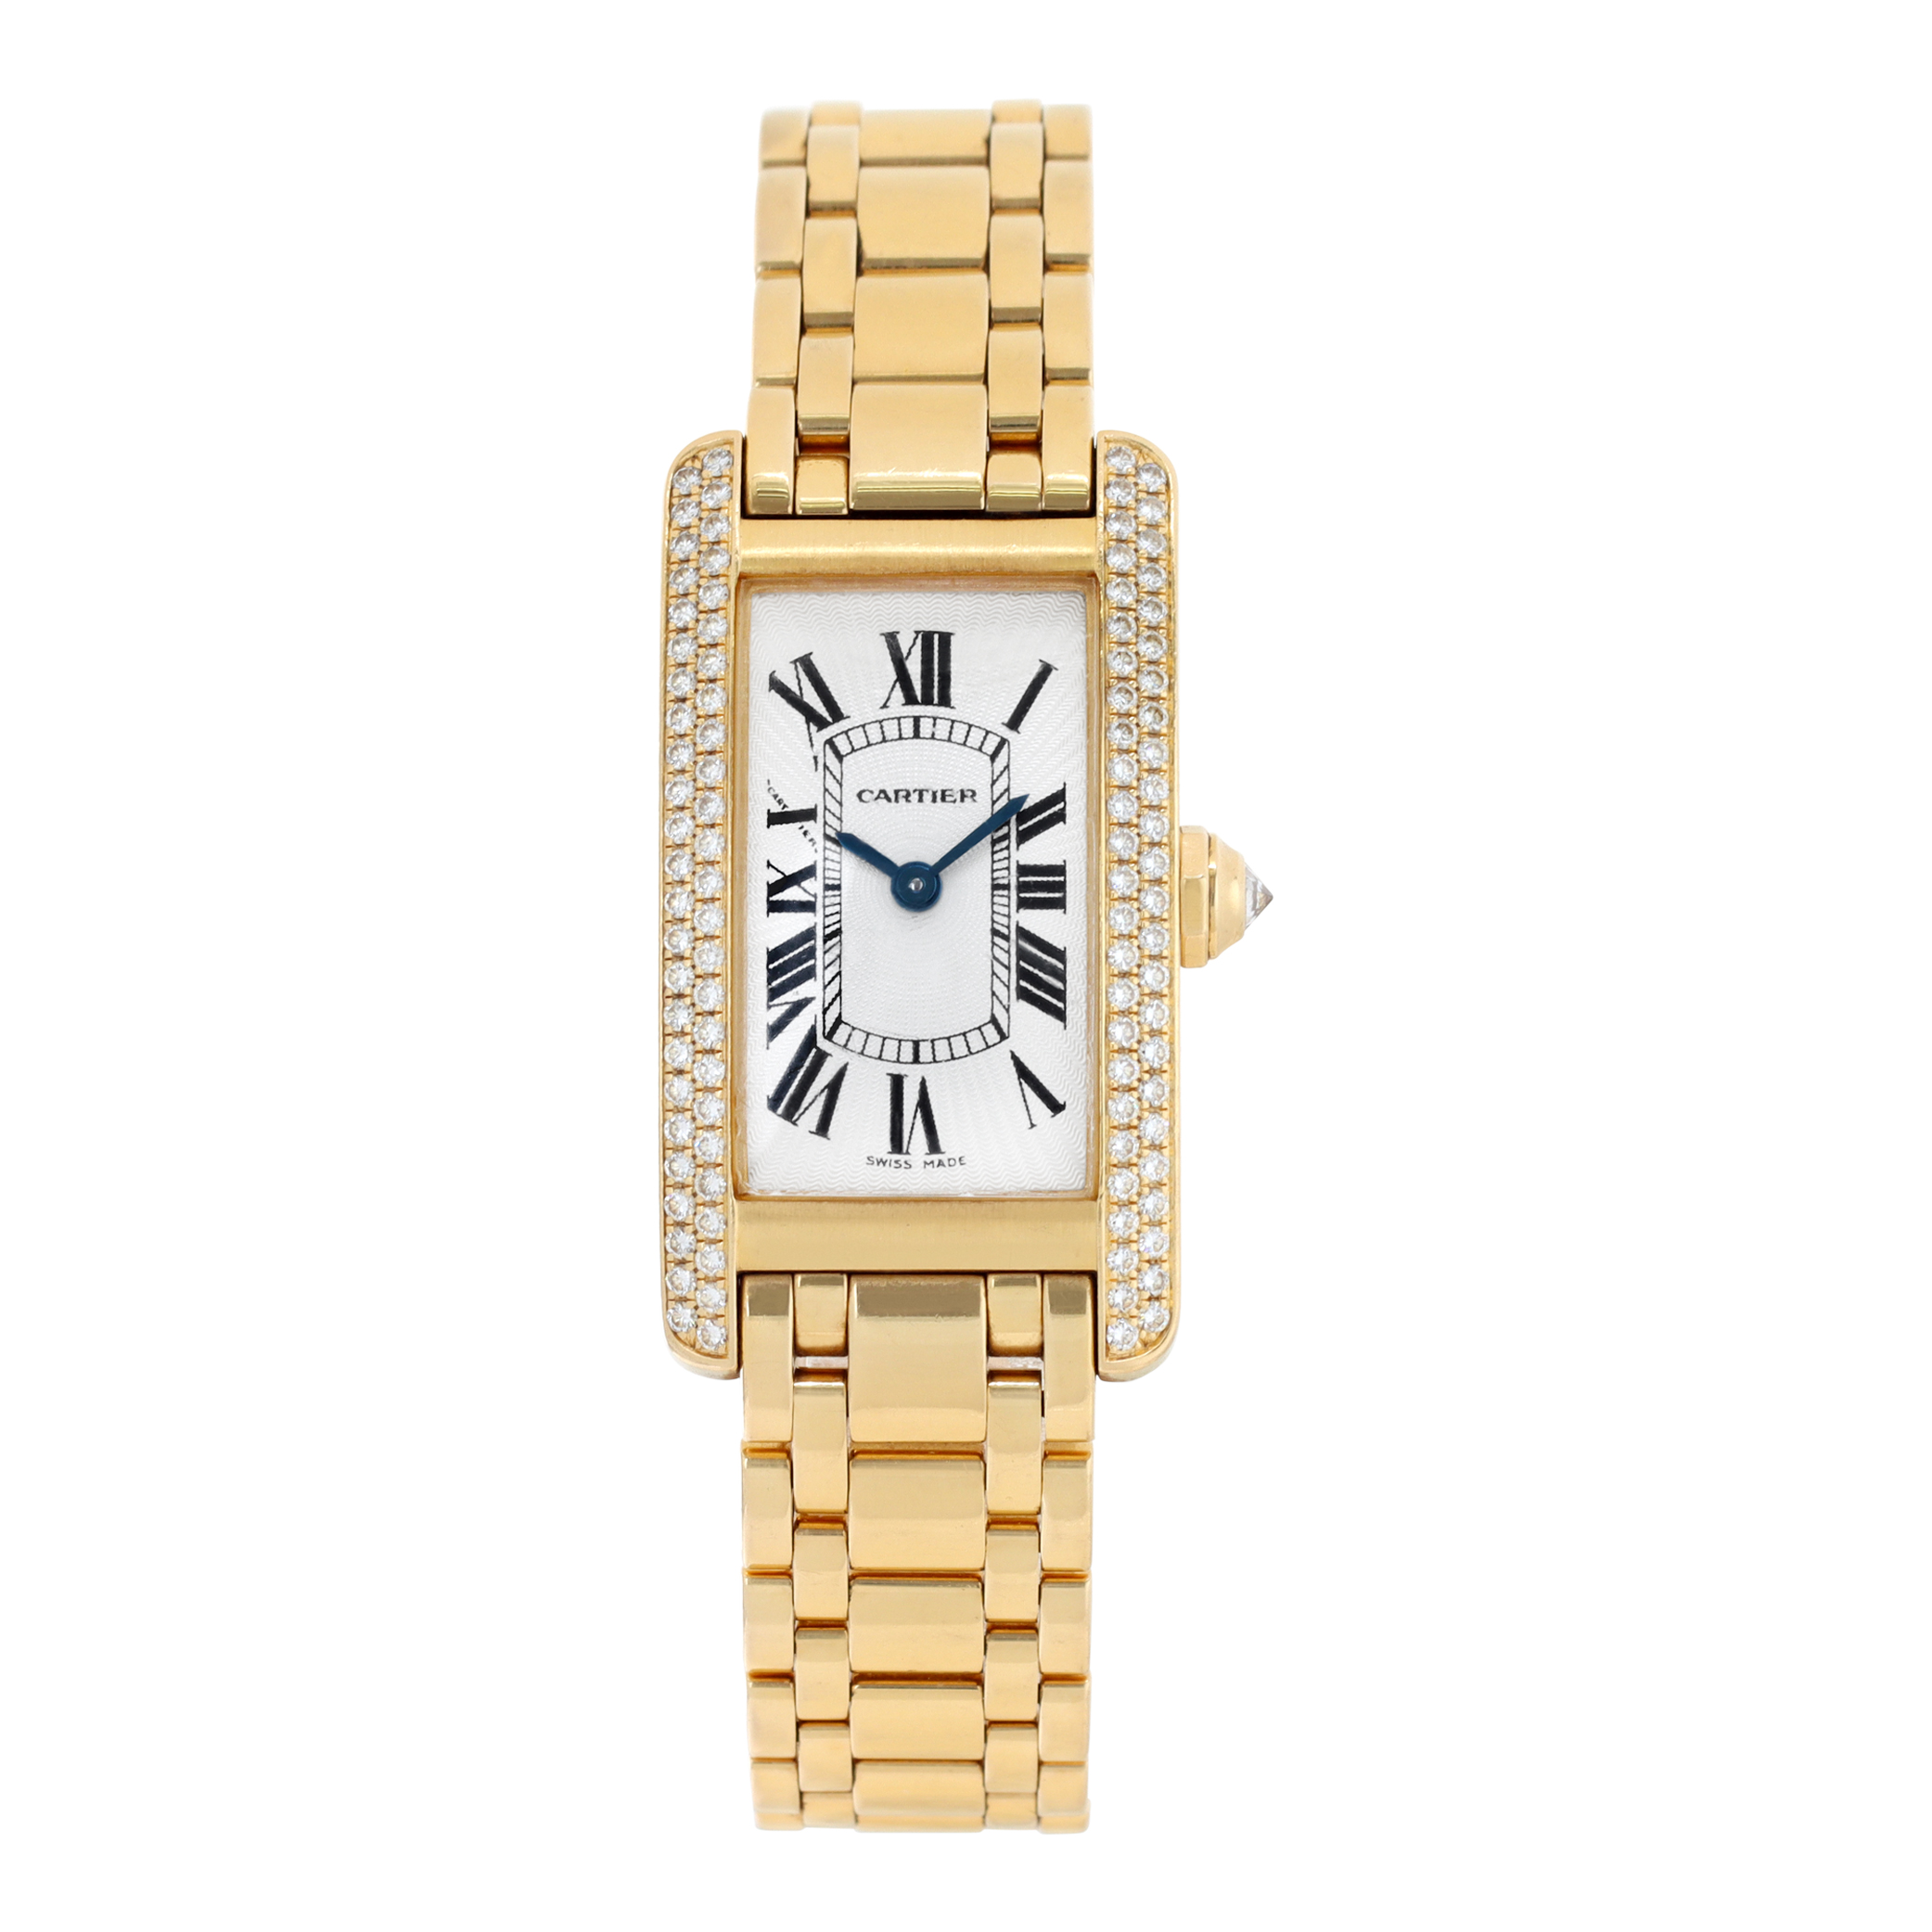 Cartier Tank Americaine 19mm 2482 (Watches)